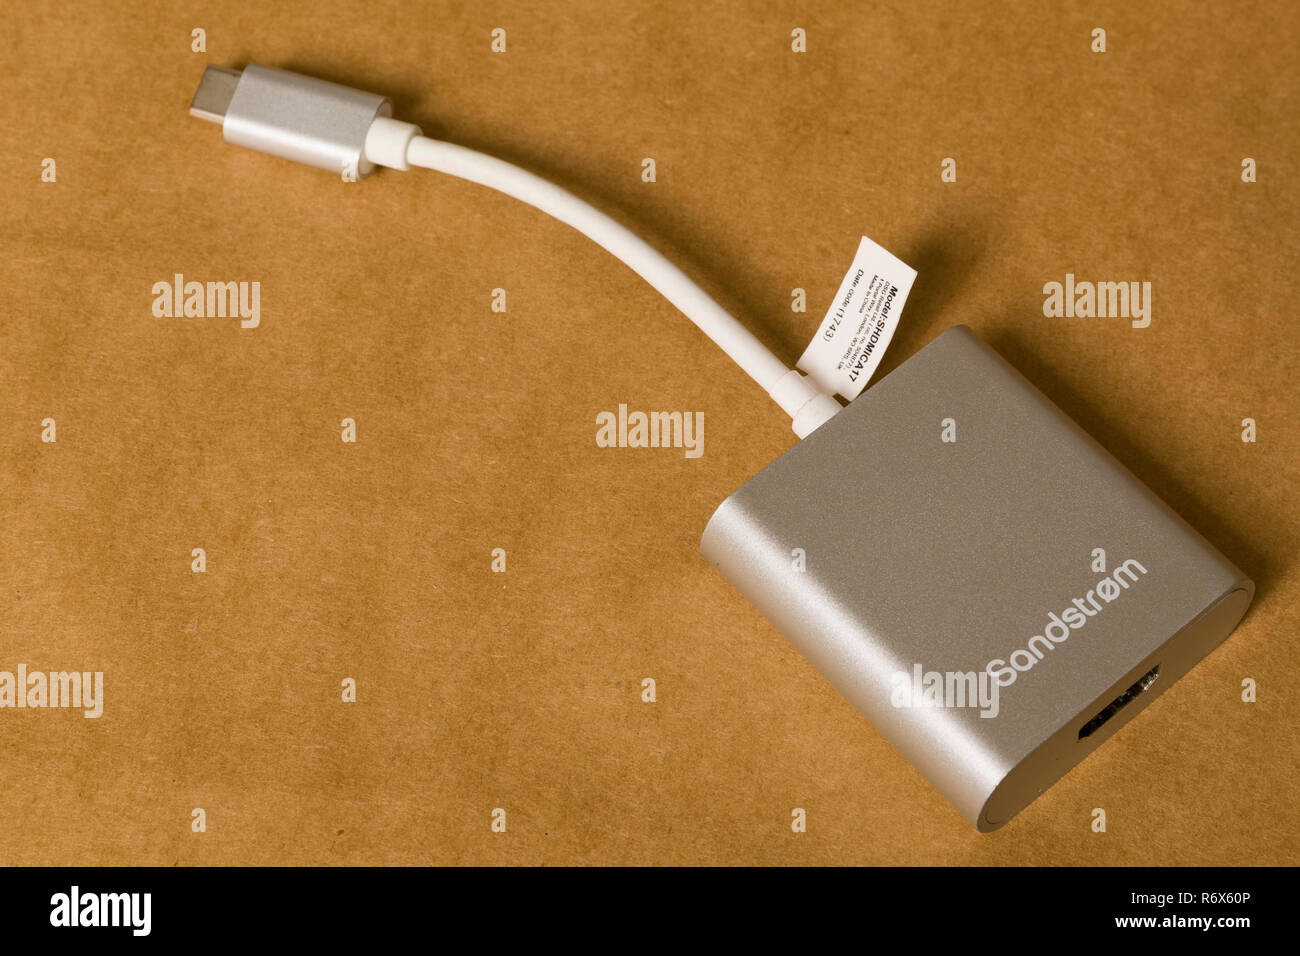 Sandstrom USB-C to HDMI dongle adapter Stock Photo - Alamy